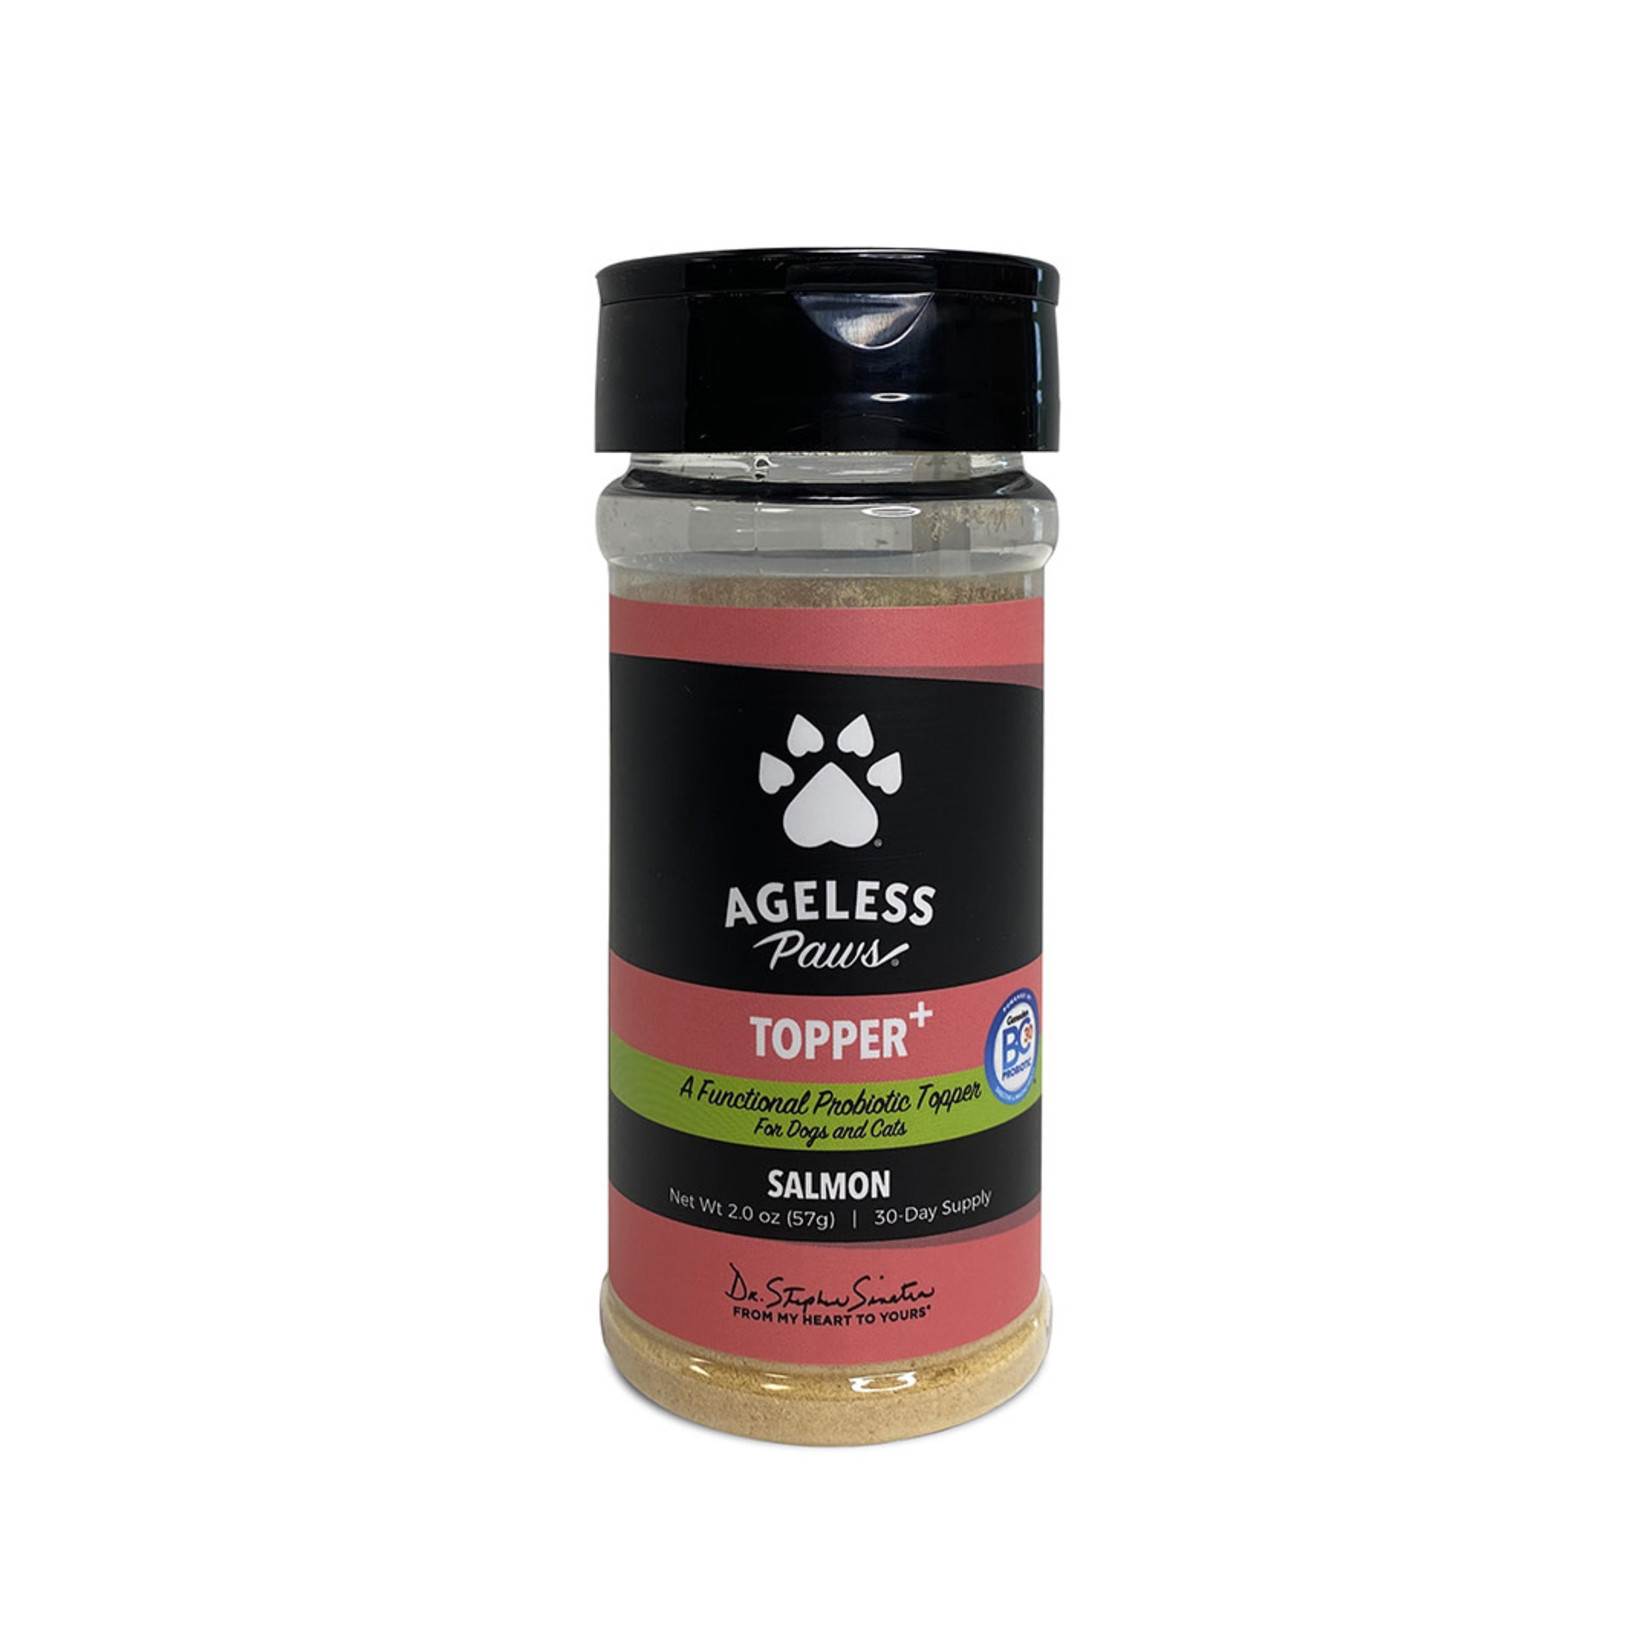 Ageless Paws Salmon Topper+ Probiotic for Dogs and Cats